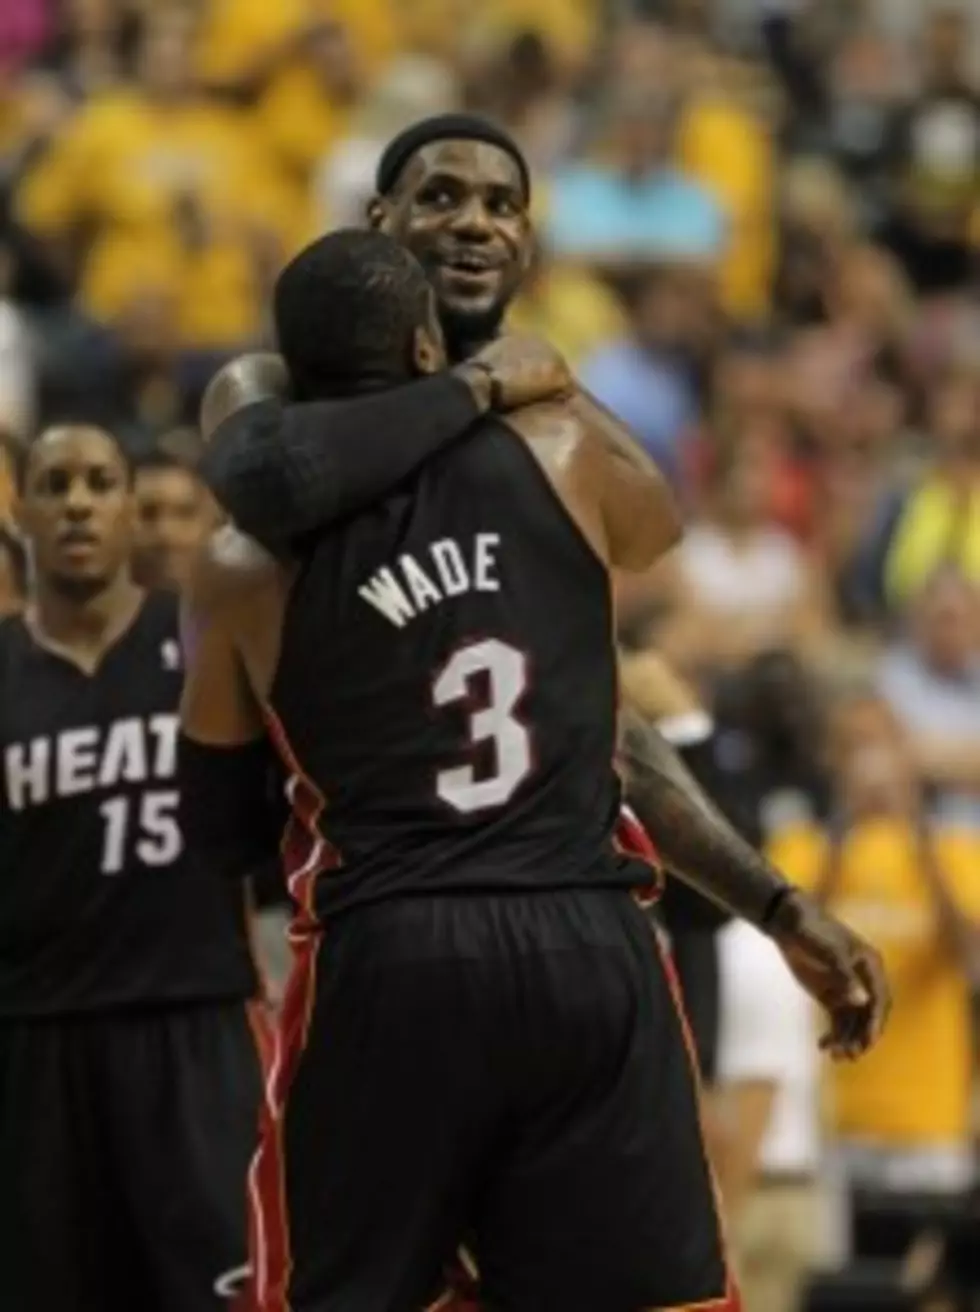 Heat Even Series With Pacers, LeBron Scores 40